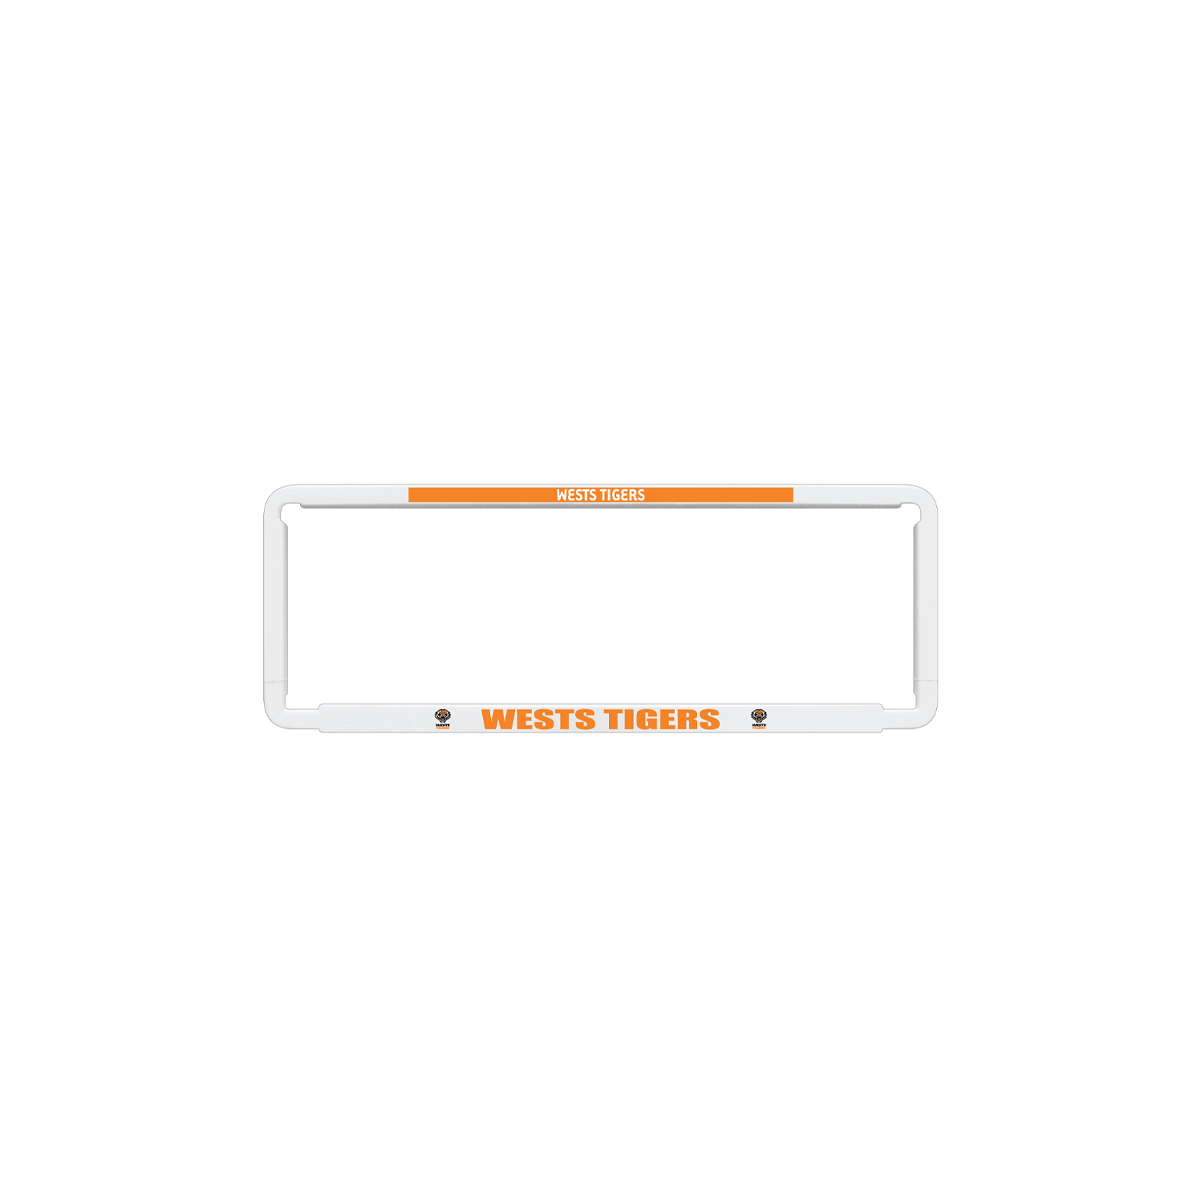 Wests Tigers NRL Number Plate Cover